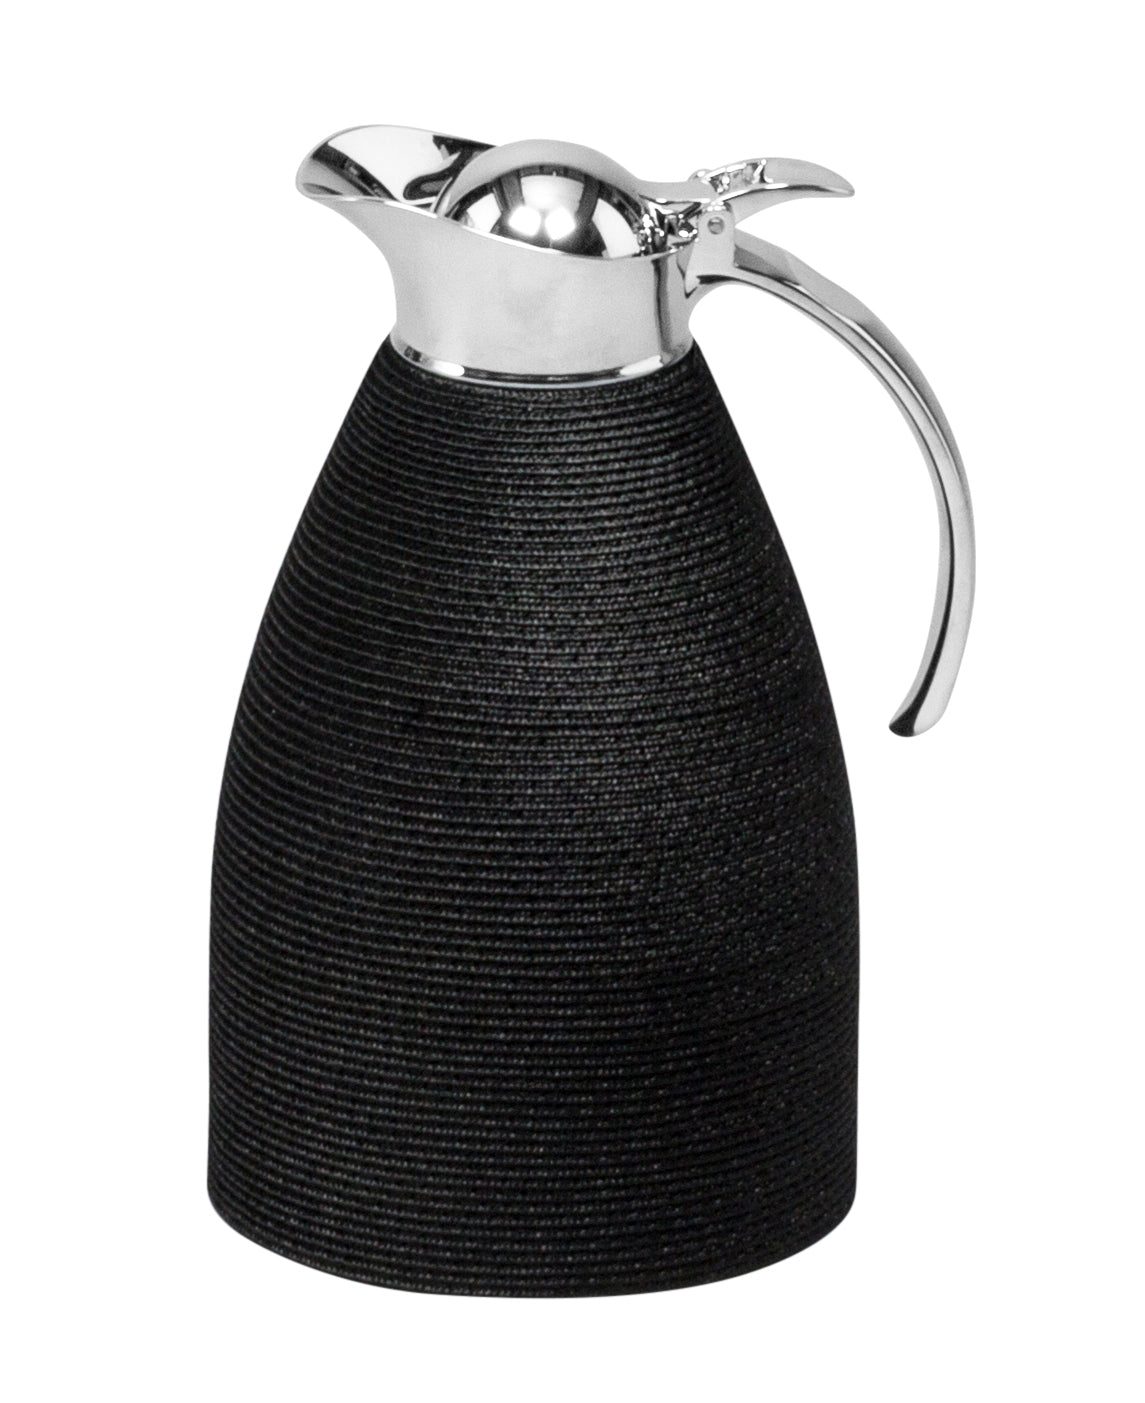 Monceau TechStraw-Covered Insulated Stainless Steel Carafe